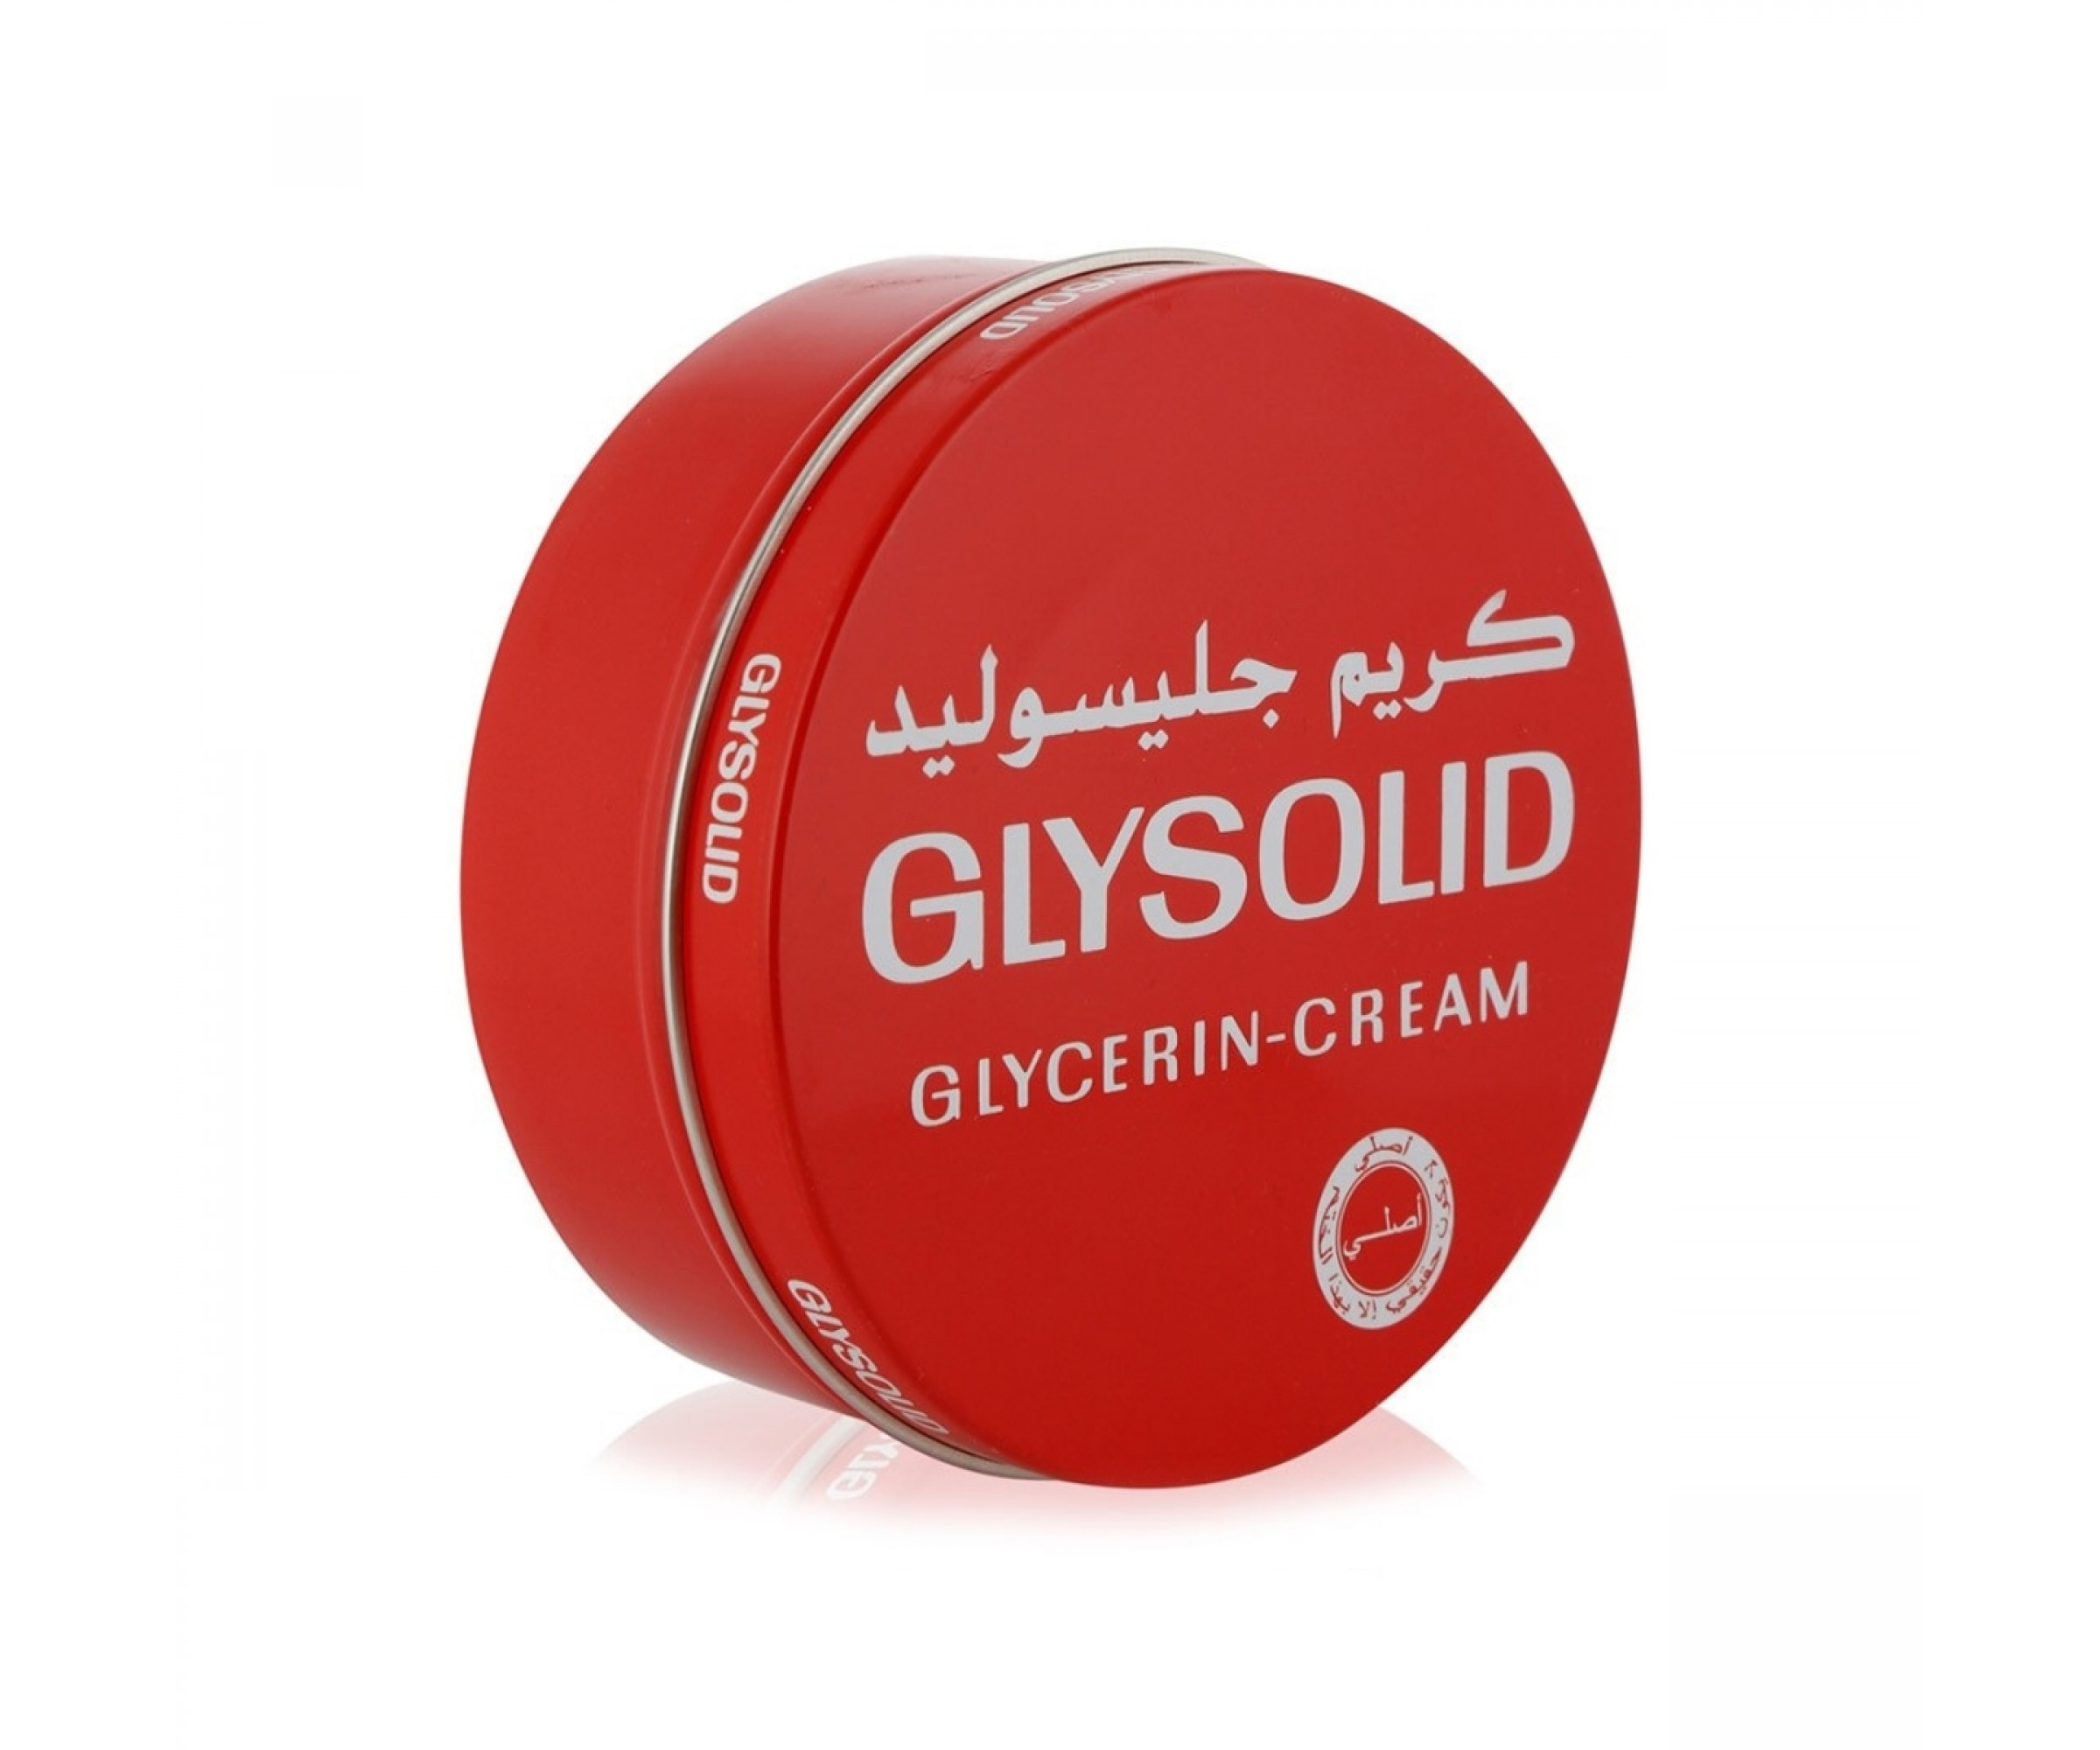 Glysolid Body Cream - Smoothes, Softens & Protects